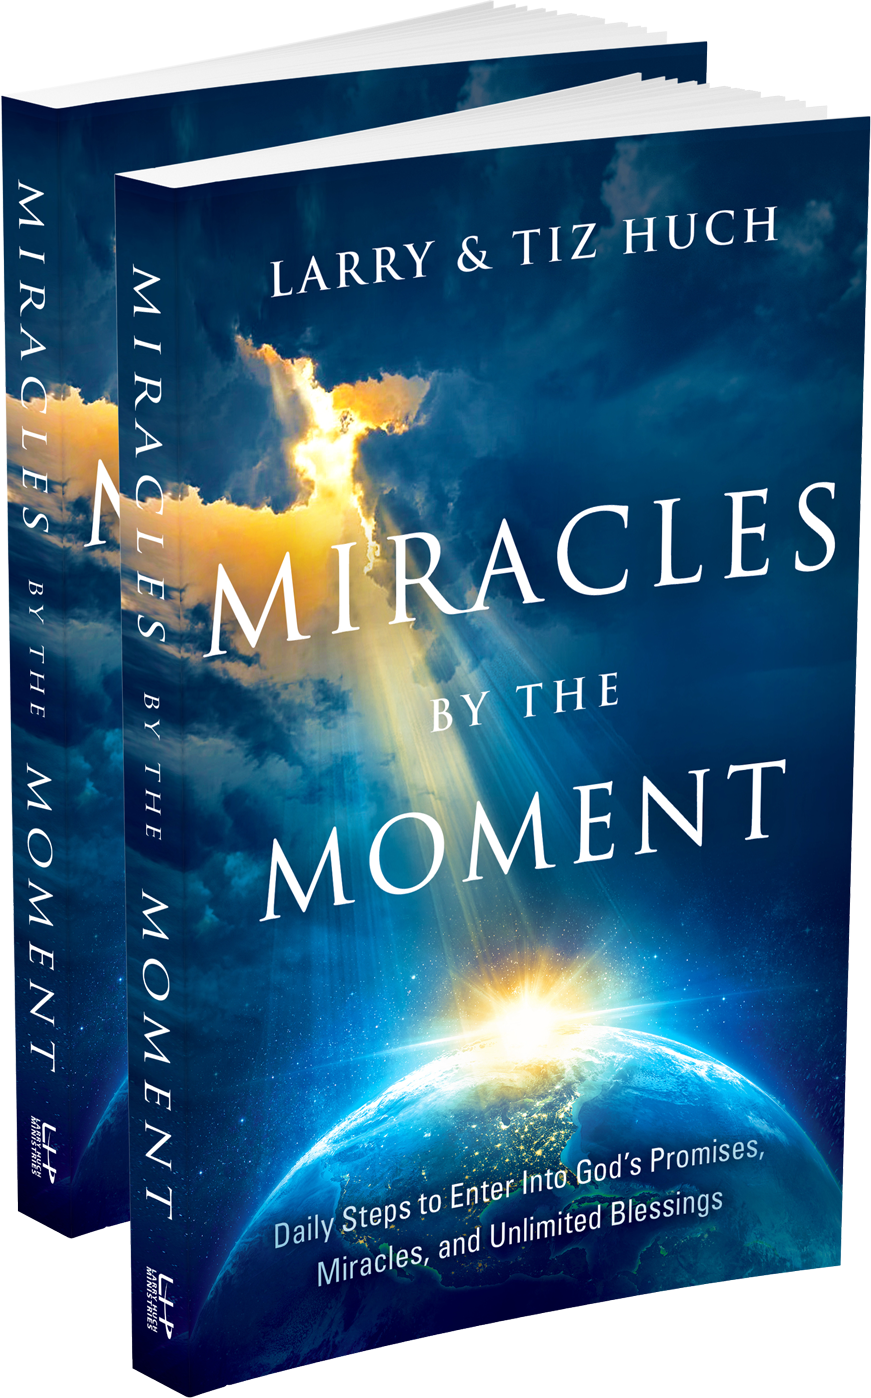 Miracles by the Moment